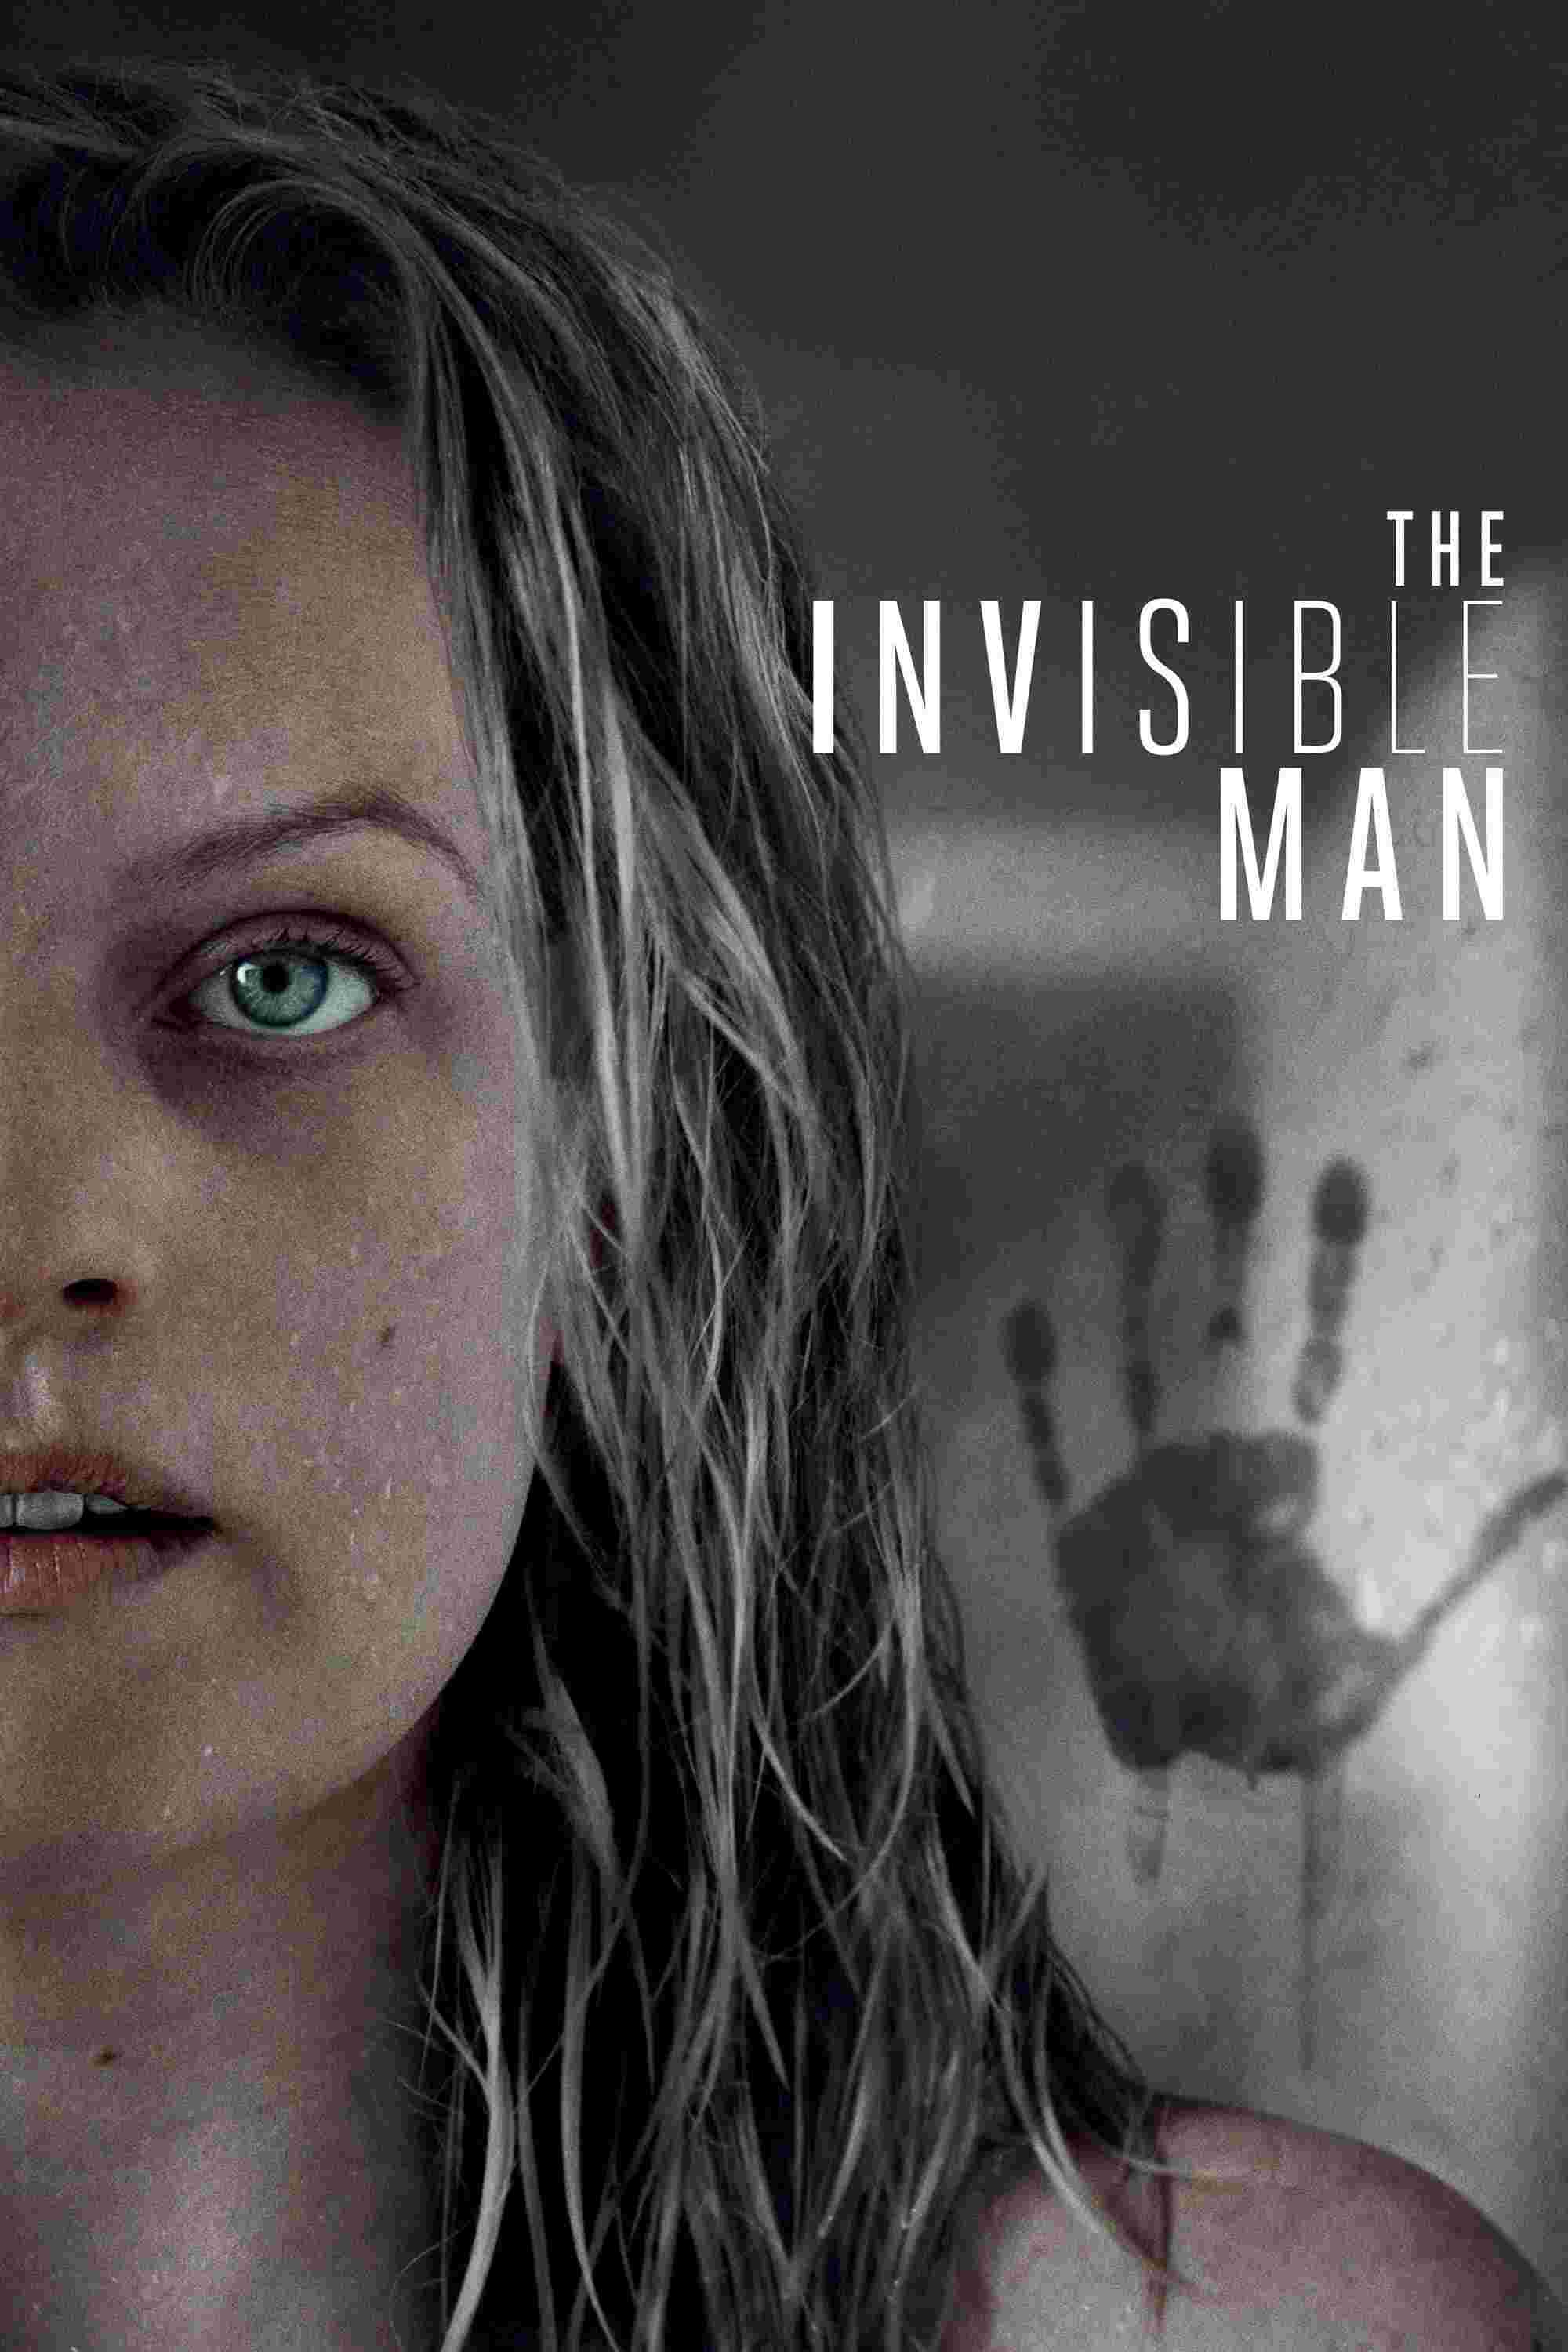 The Invisible Man (2020) Elisabeth Moss